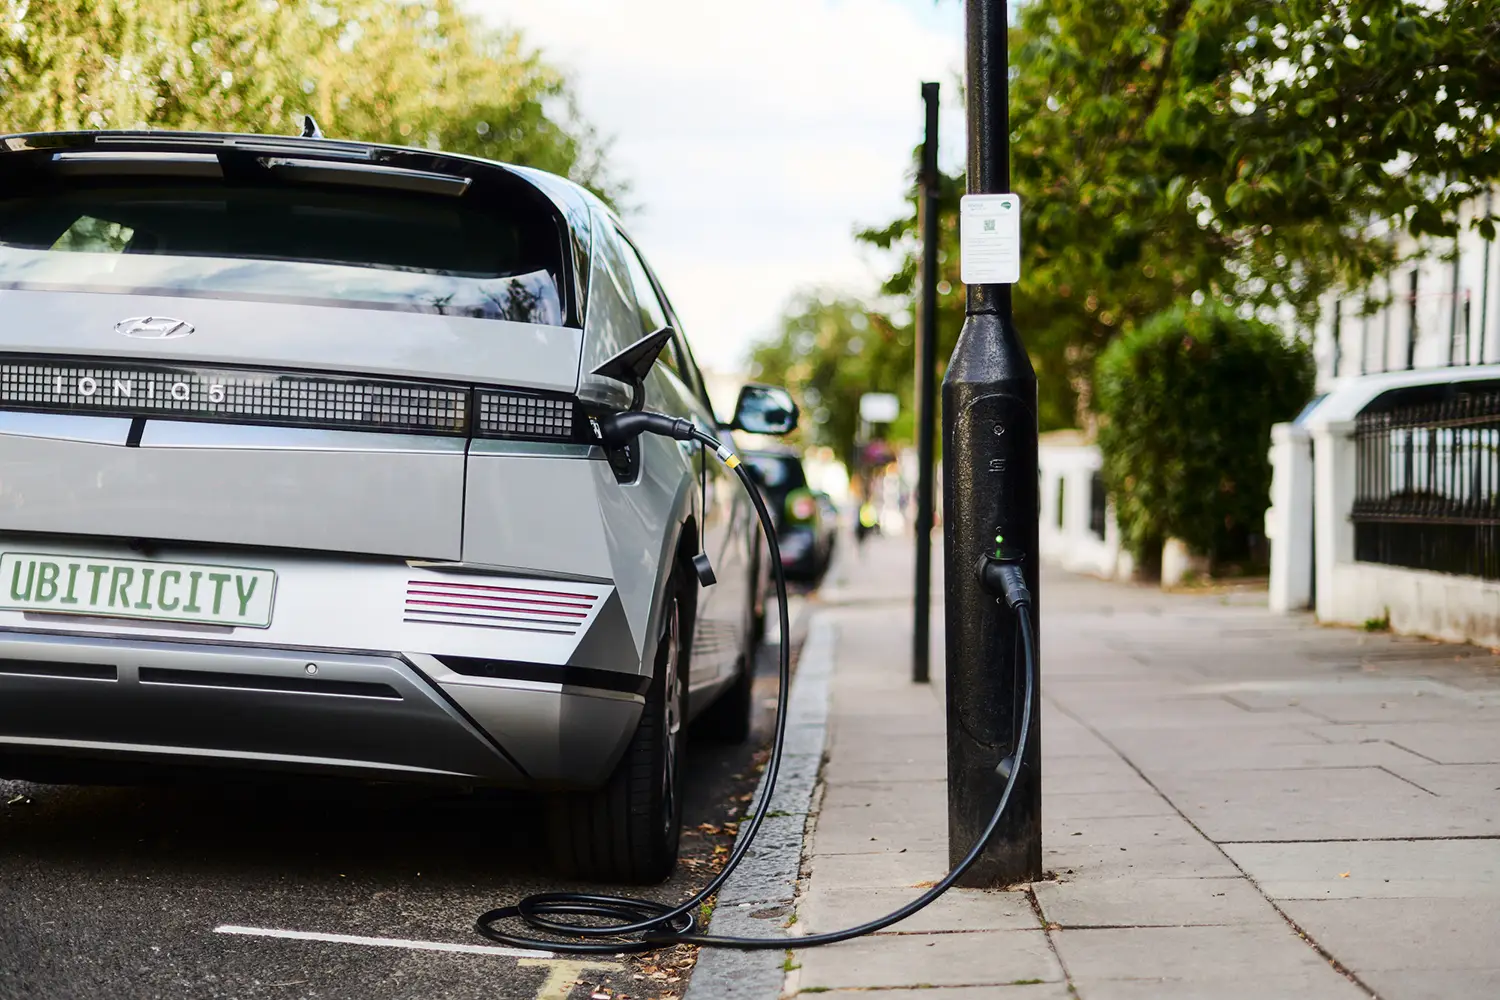 An EV is charging at a ubitricity lamppost electric car charging station in the UK, part of the largest public charging network.